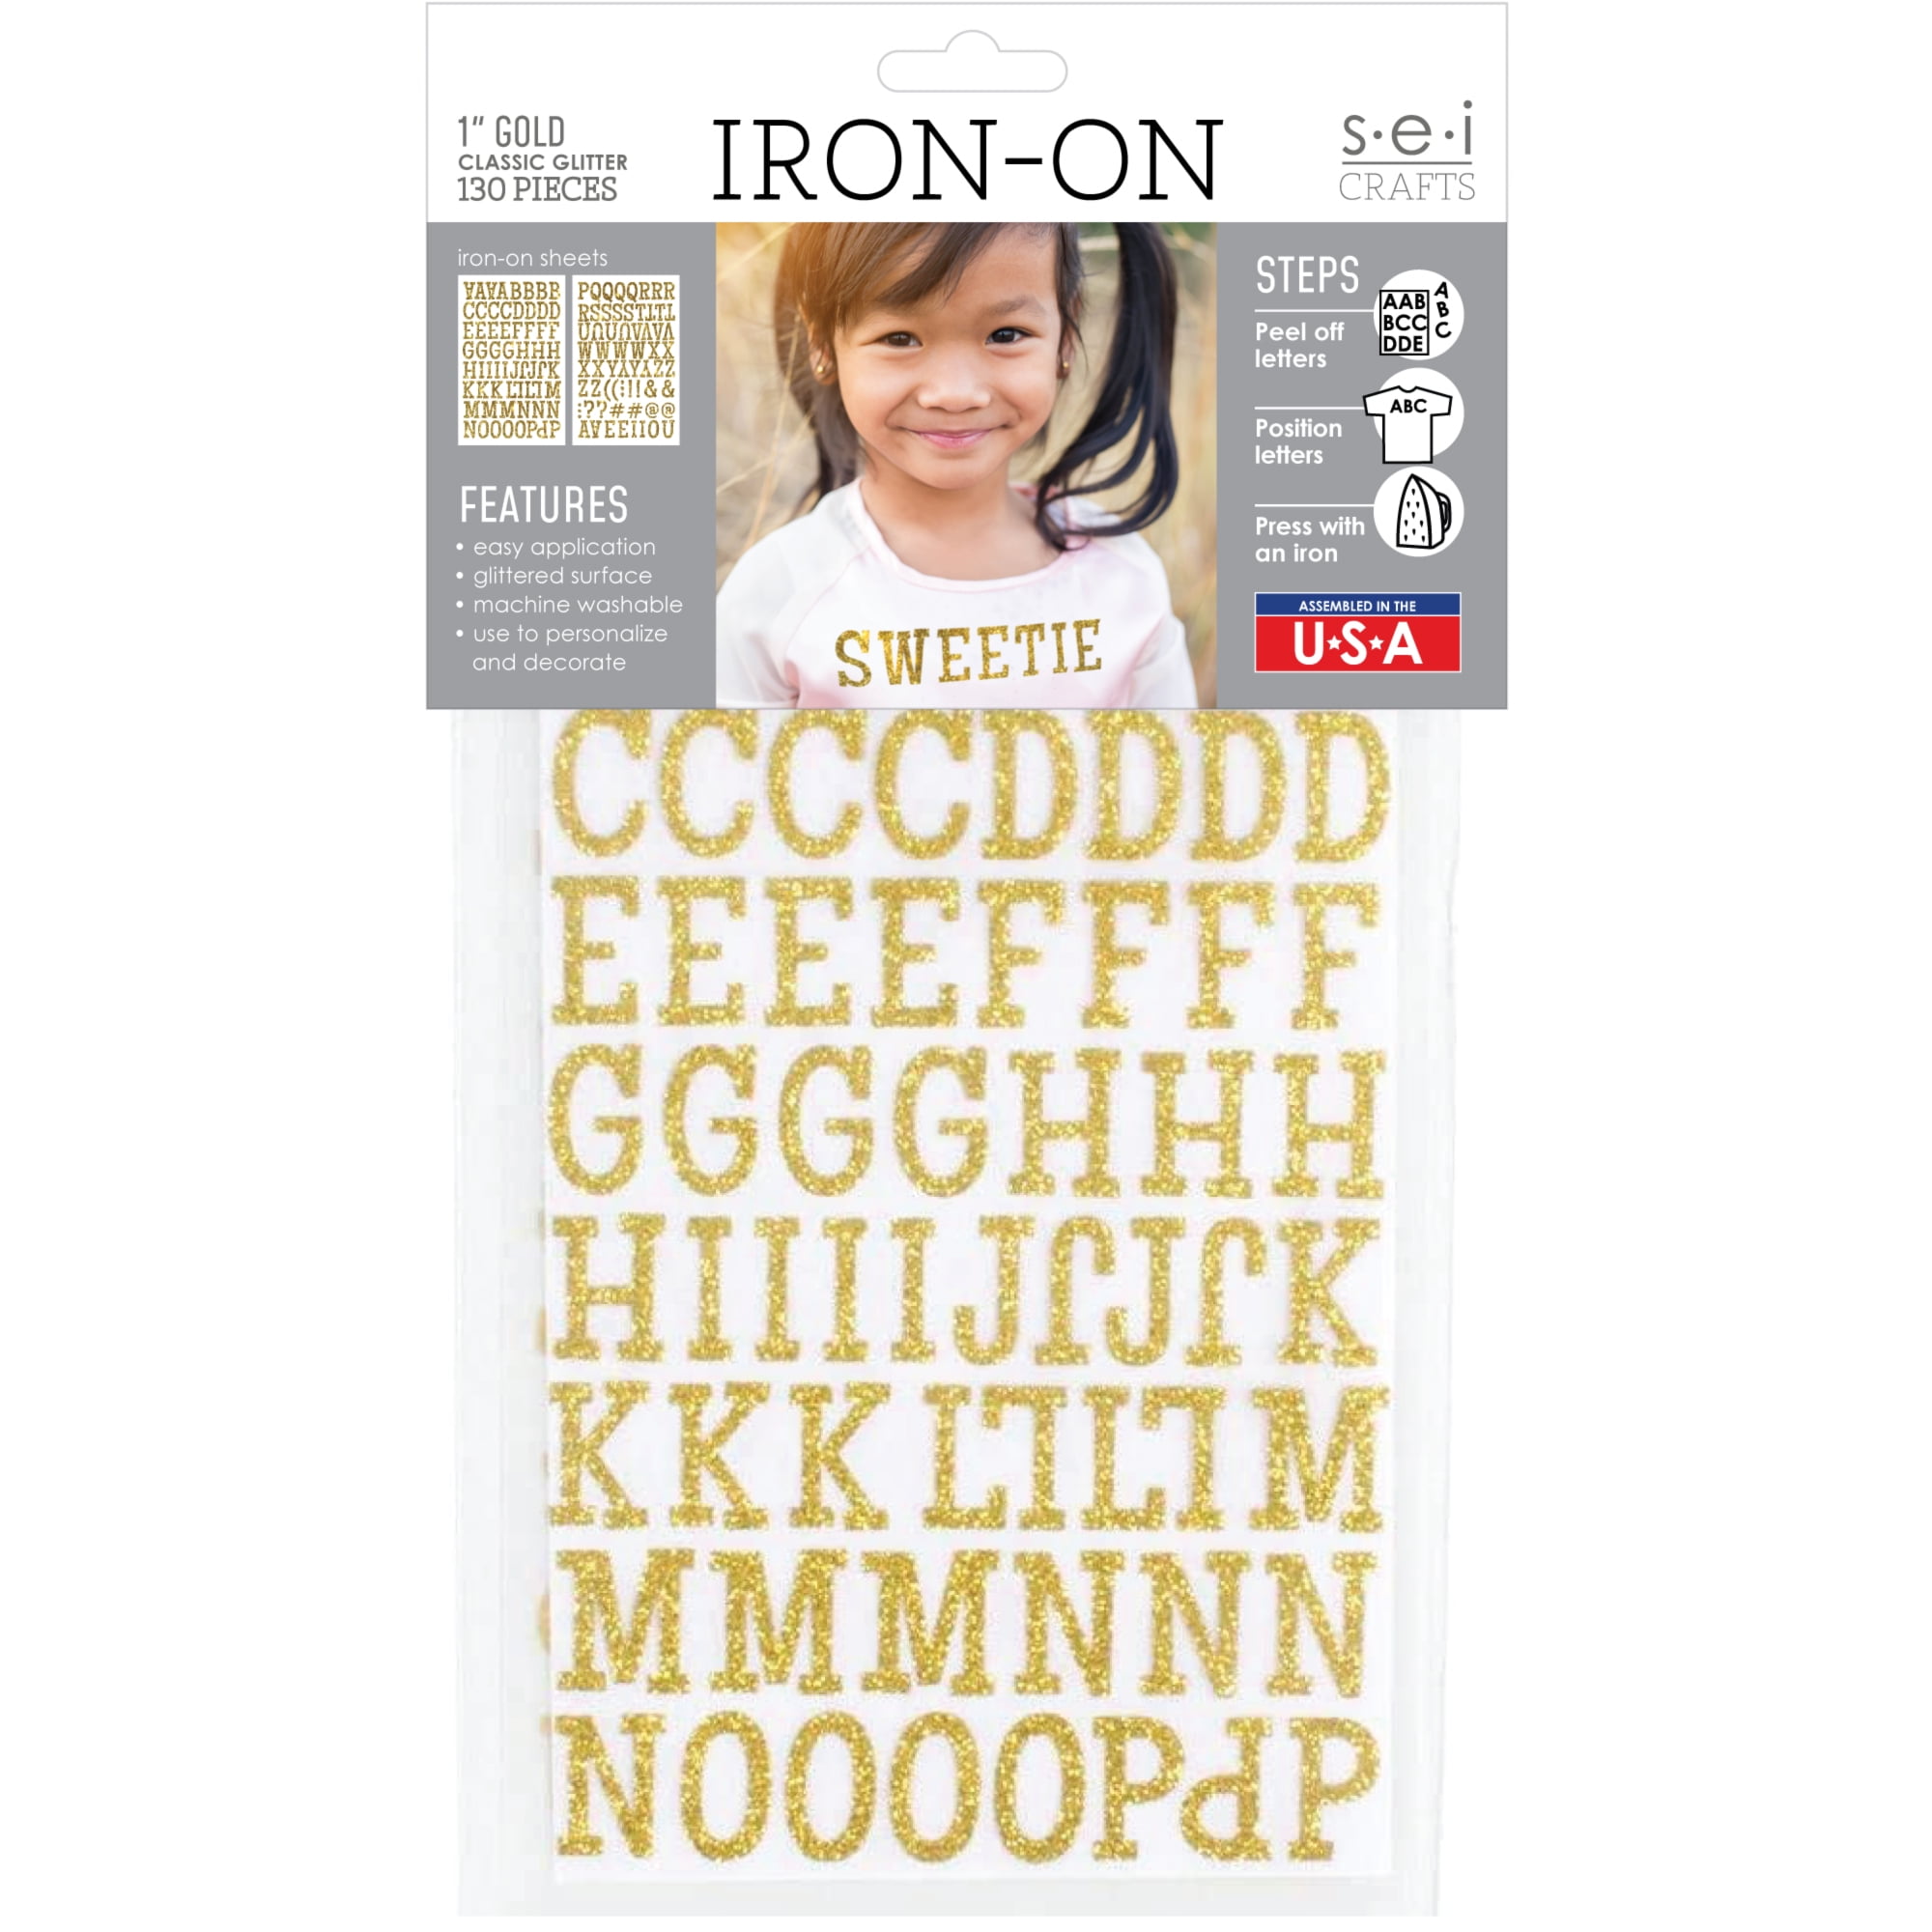 24 Sheets 624 pcs Iron on Letters, Heat Transfer Iron-On Letters for  Clothing, T-Shirts and Their Fabrics Printing DIY Craft, Includes Gold,  Blue